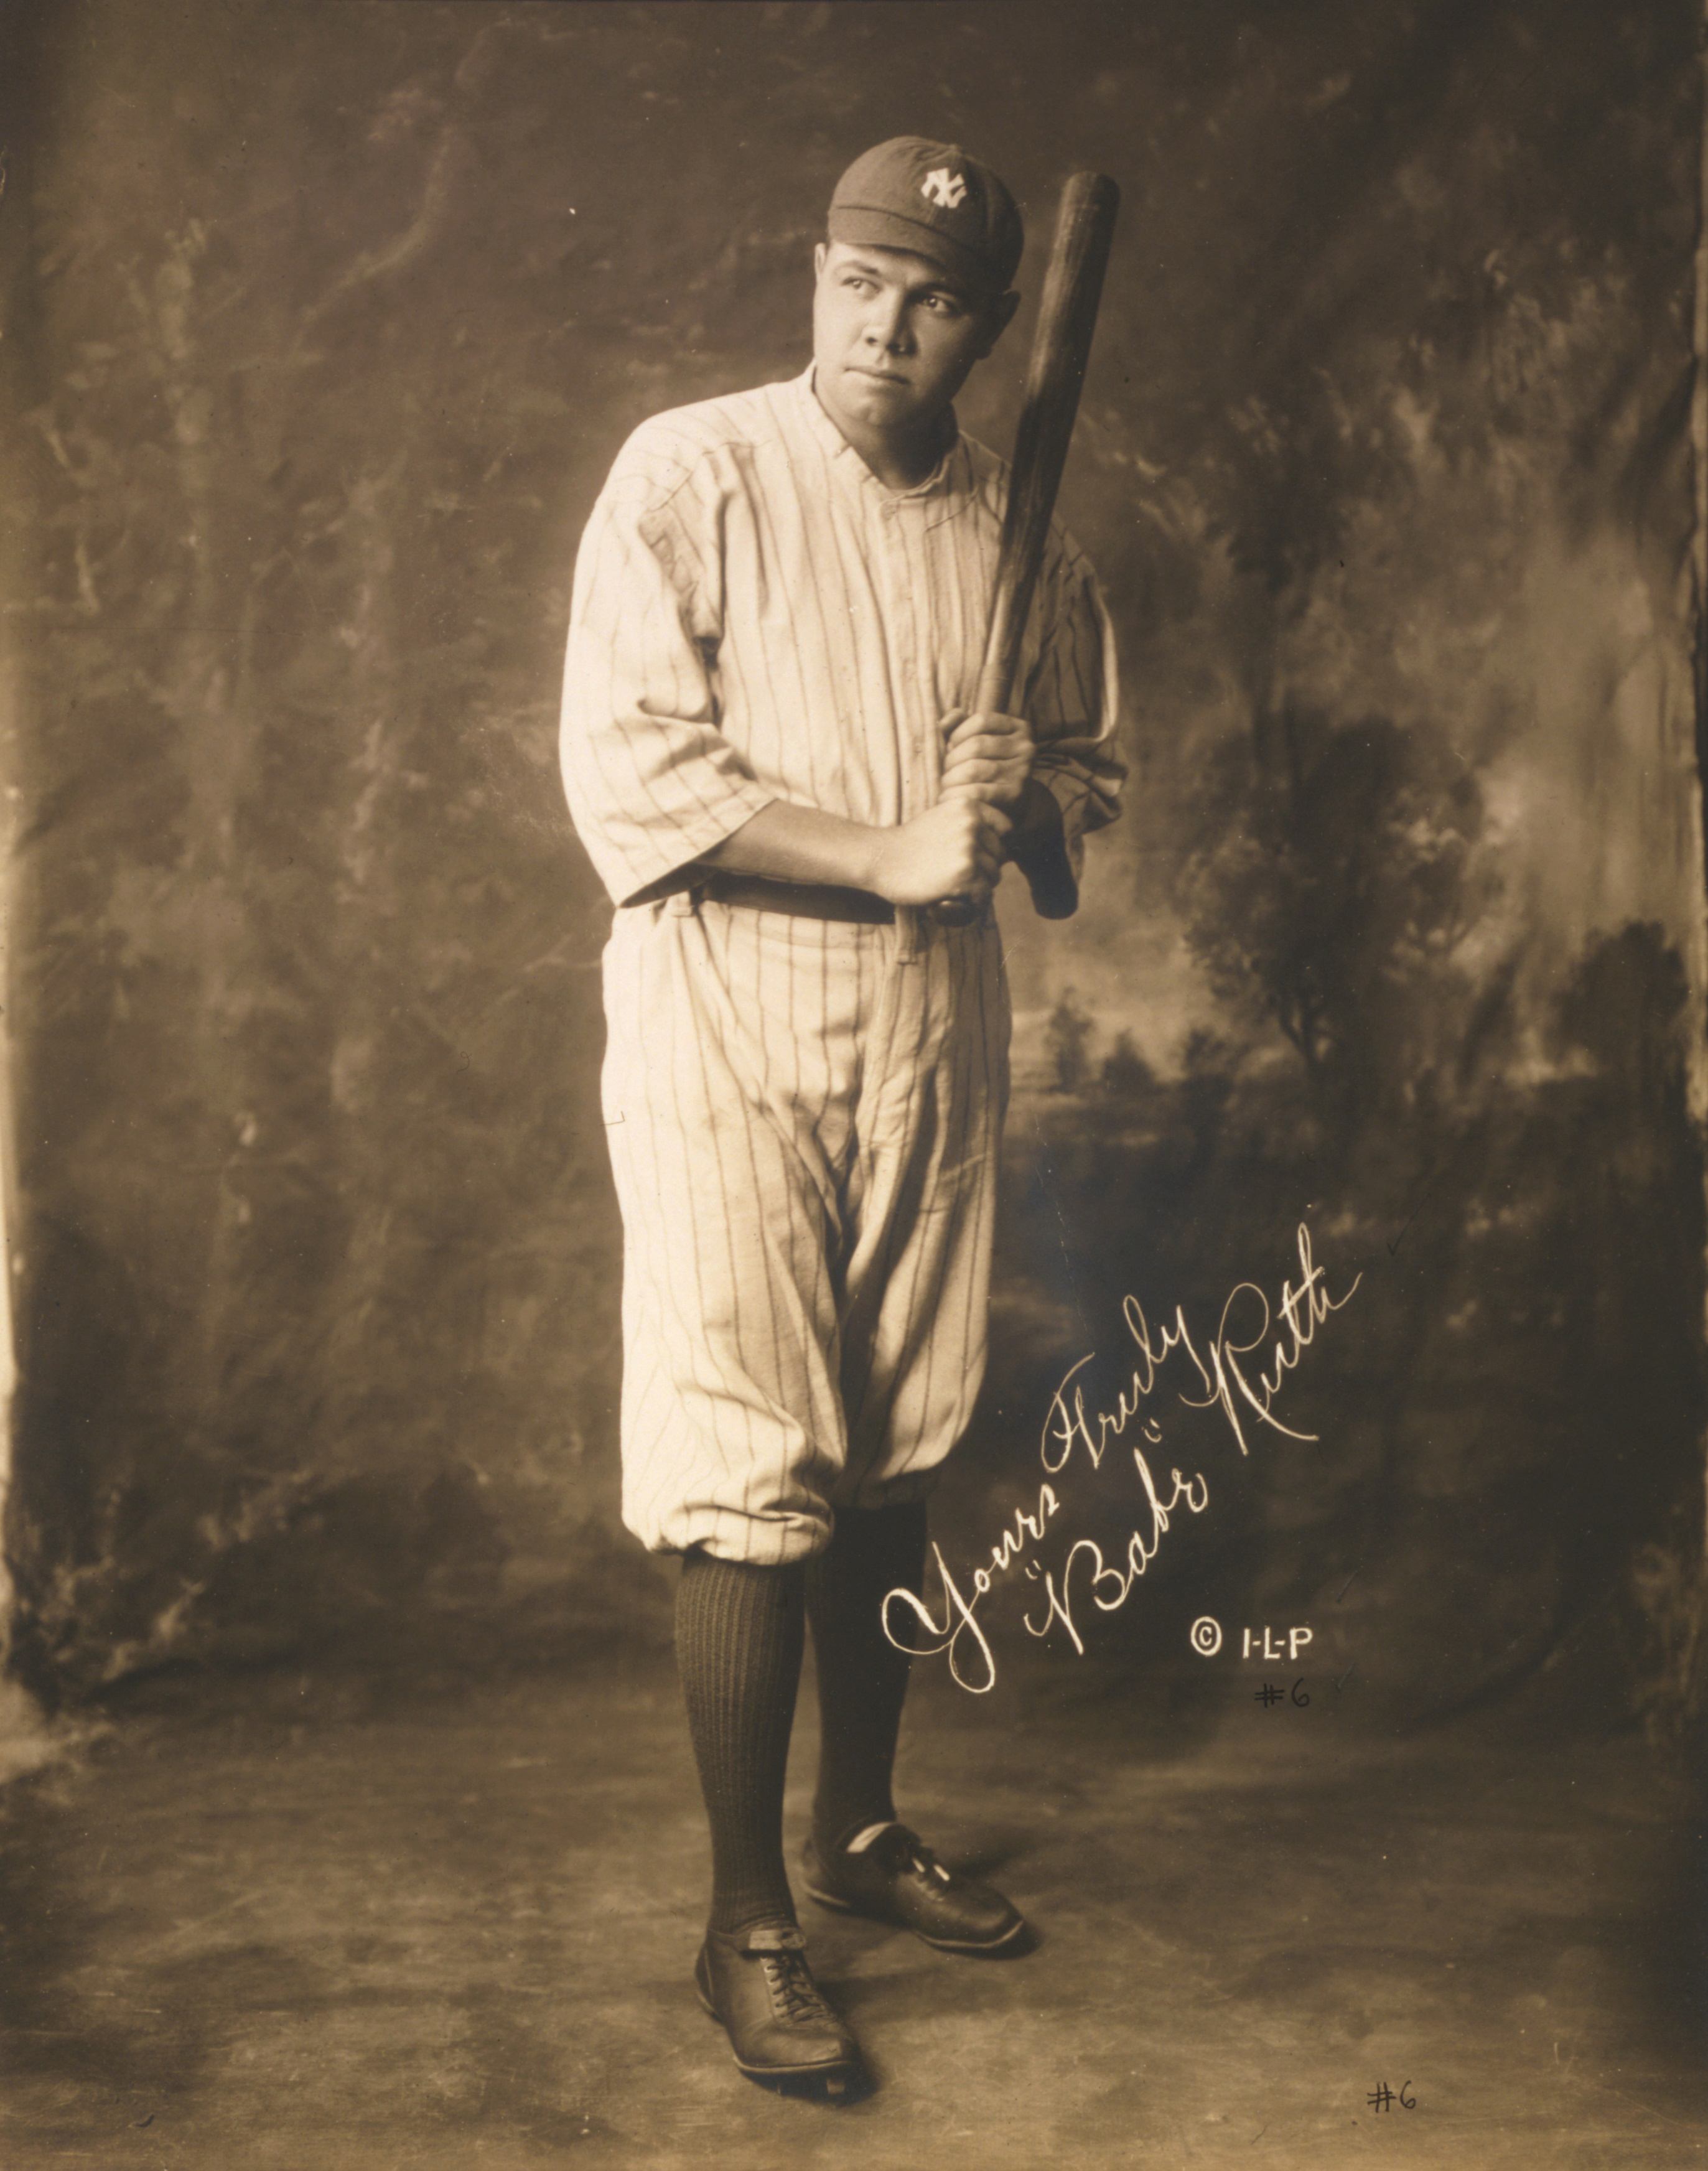 Smithsonian Insider Seven Babe Ruth Facts From The National Portrait Gallery Exhibit “one Life